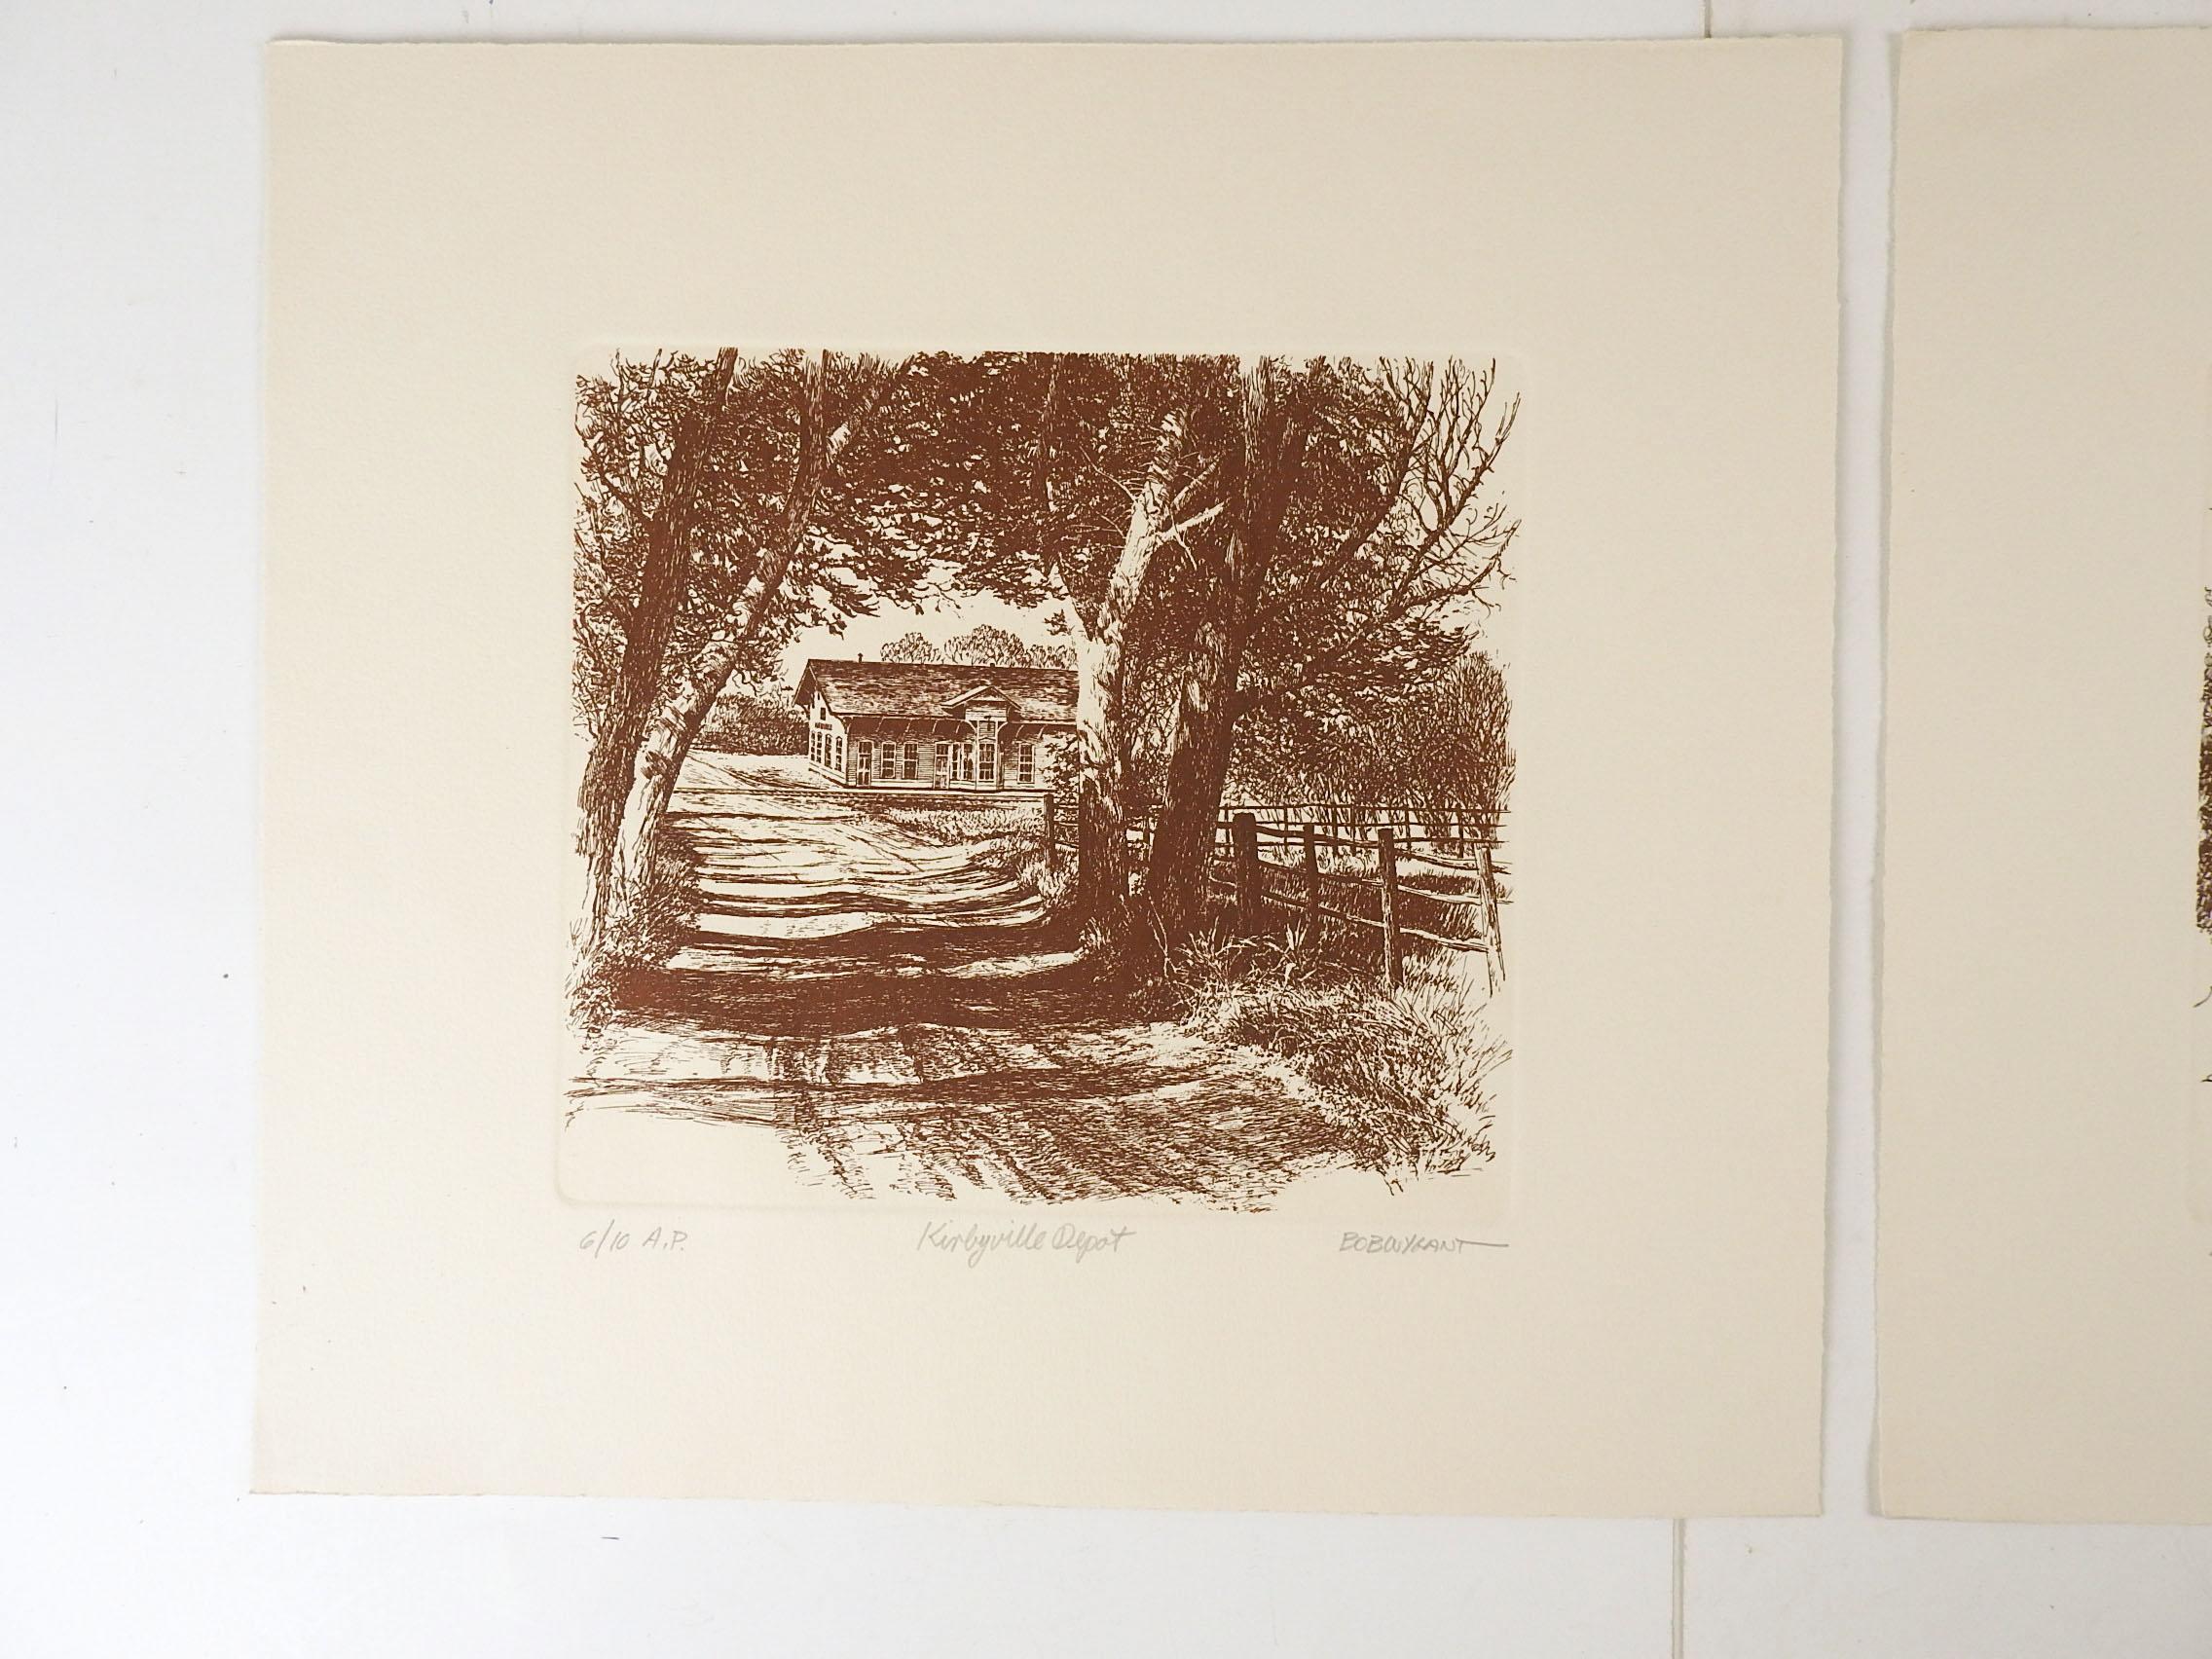 Pair of etchings, log cabin and Kirbyville Train Depot on cream heavy paper by Bob Wygant (1927-2008) Texas. Signed, titled Log Cabin, numbered 4/7 AP and titled Kirbyville Depot, numbered 6/10 AP. Unframed, image size 10